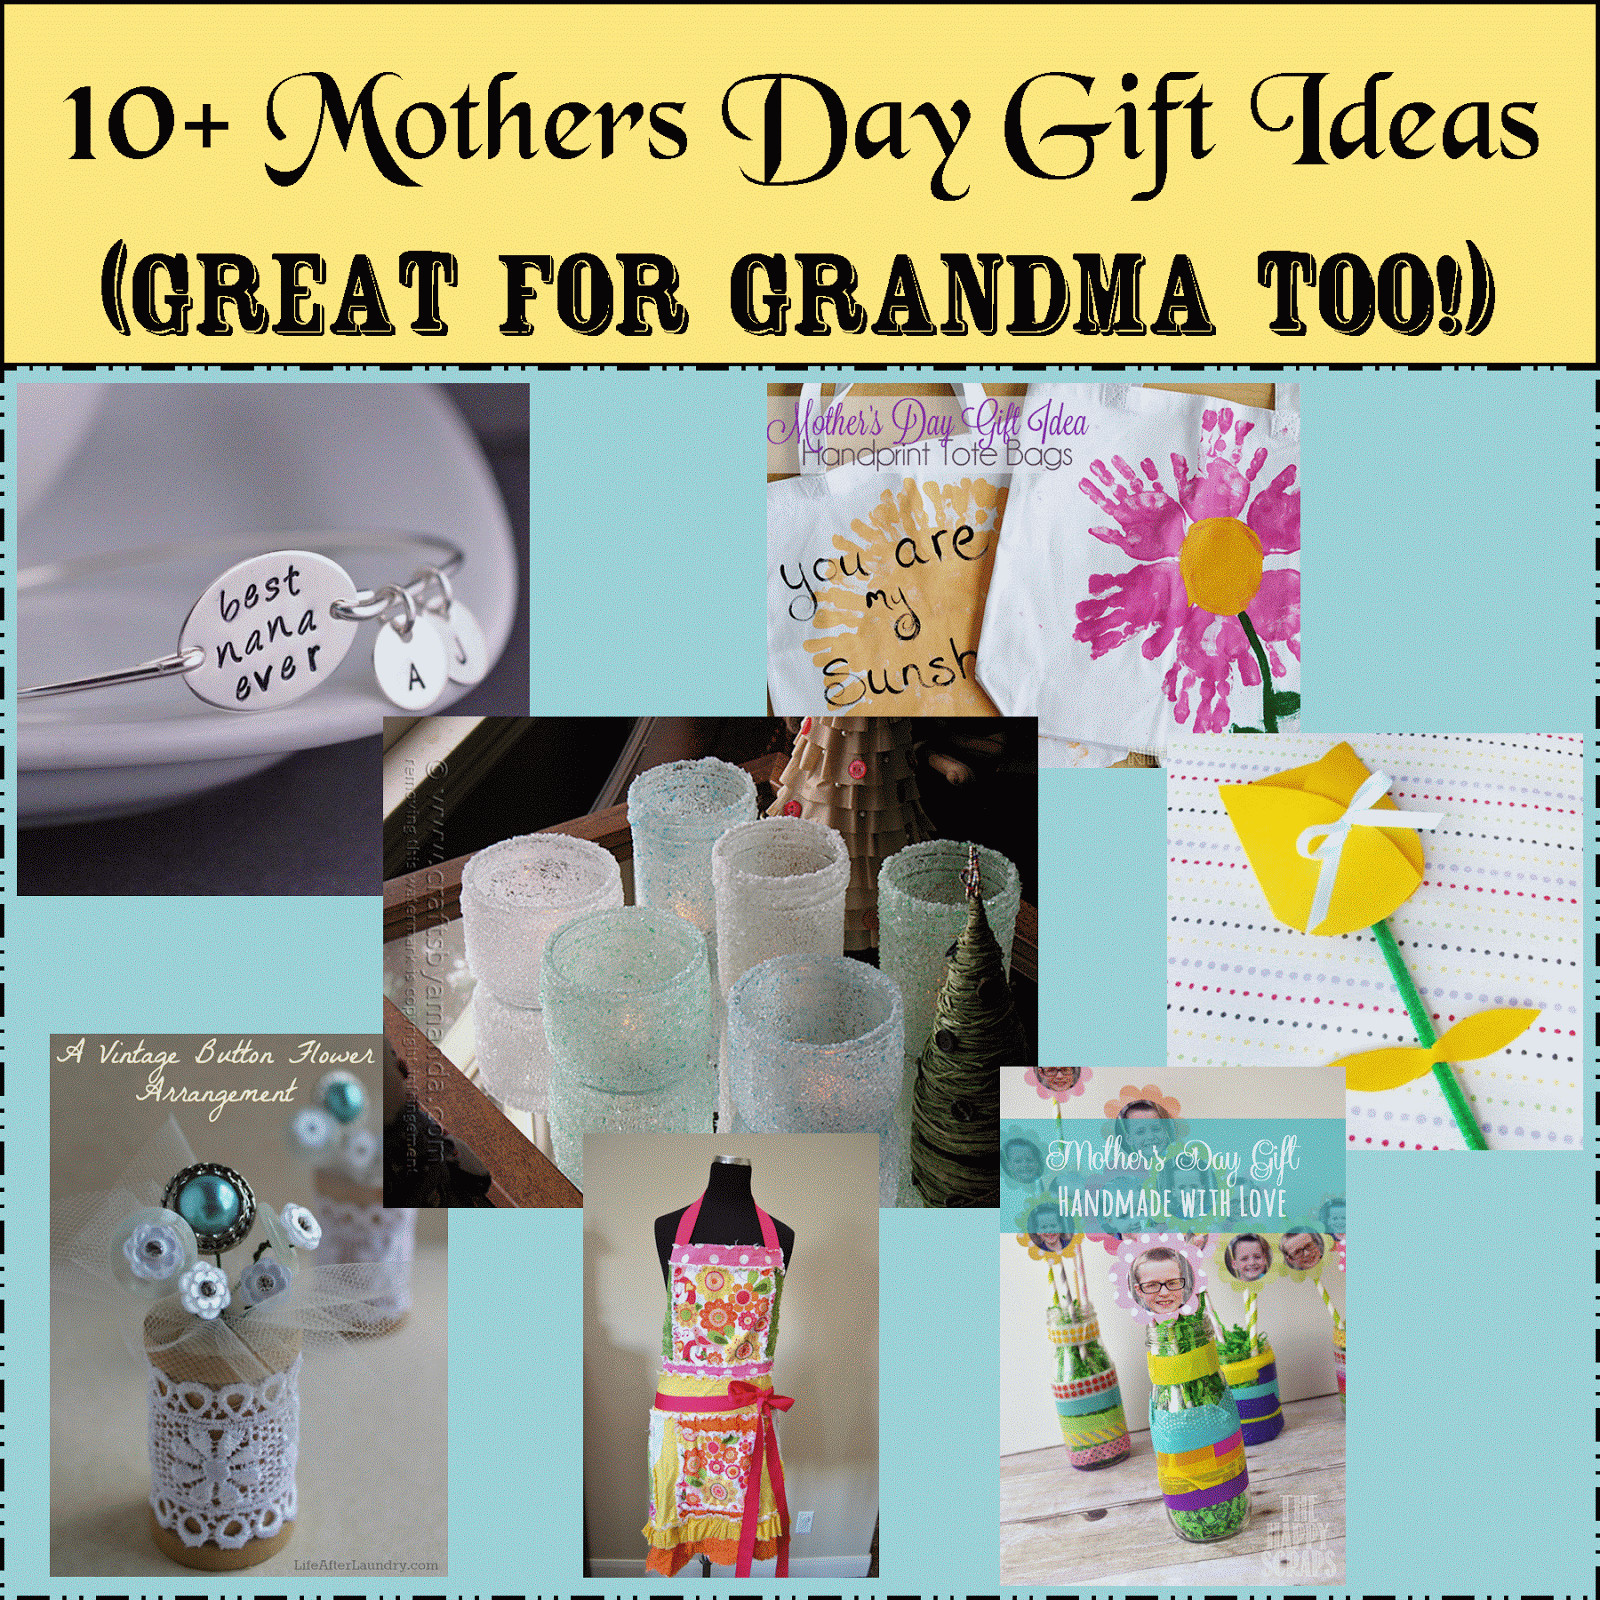 Gift Ideas For A Grandmother
 Mother Day Gifts Roundup Perfect for Grandma Too